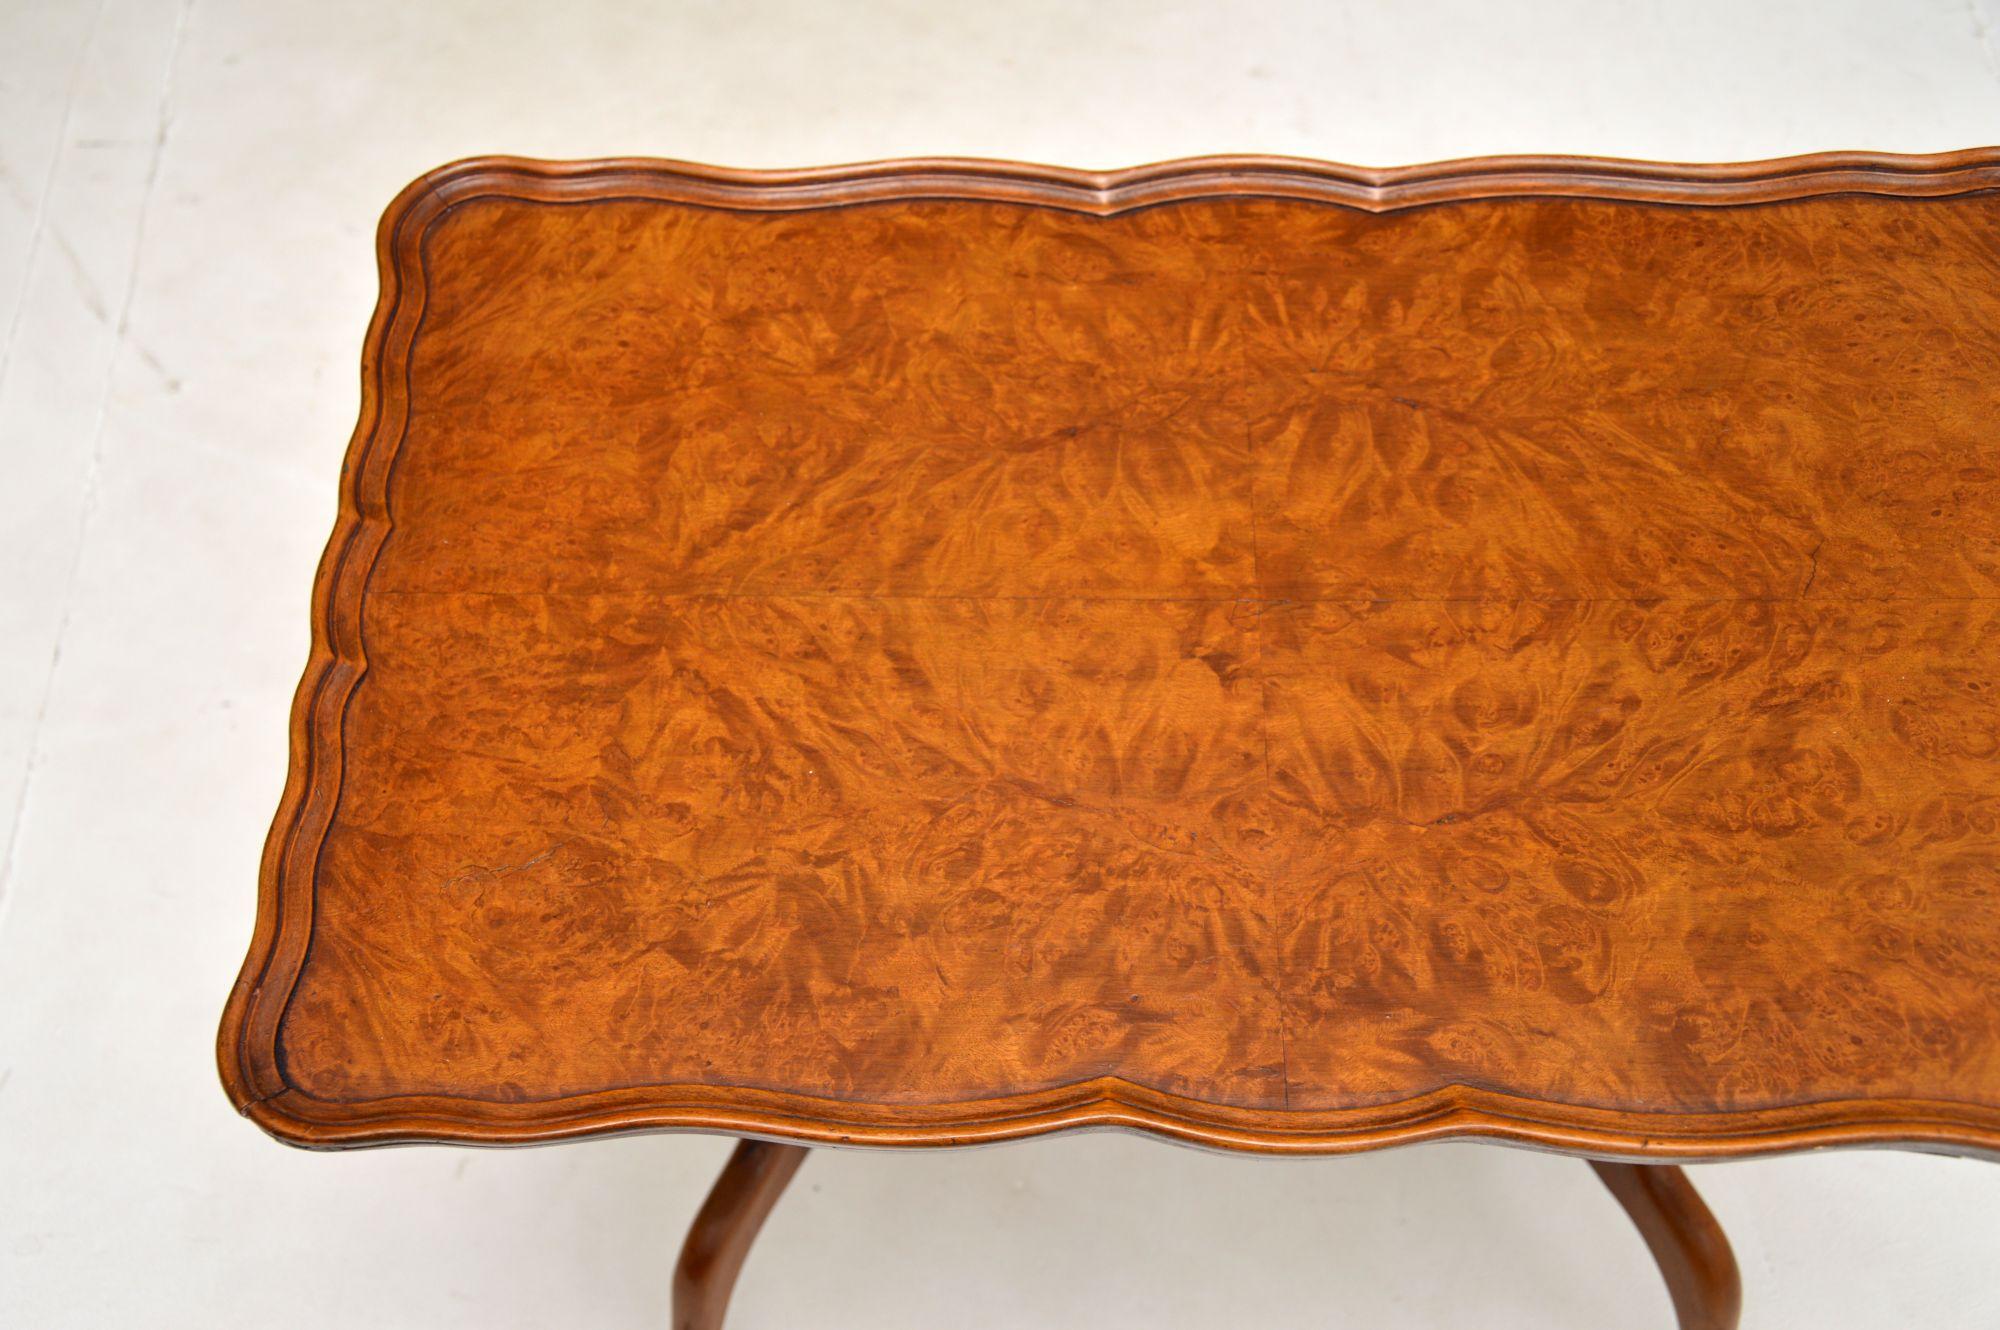 Antique Burr Walnut Pie Crust Coffee / Side Table In Good Condition For Sale In London, GB